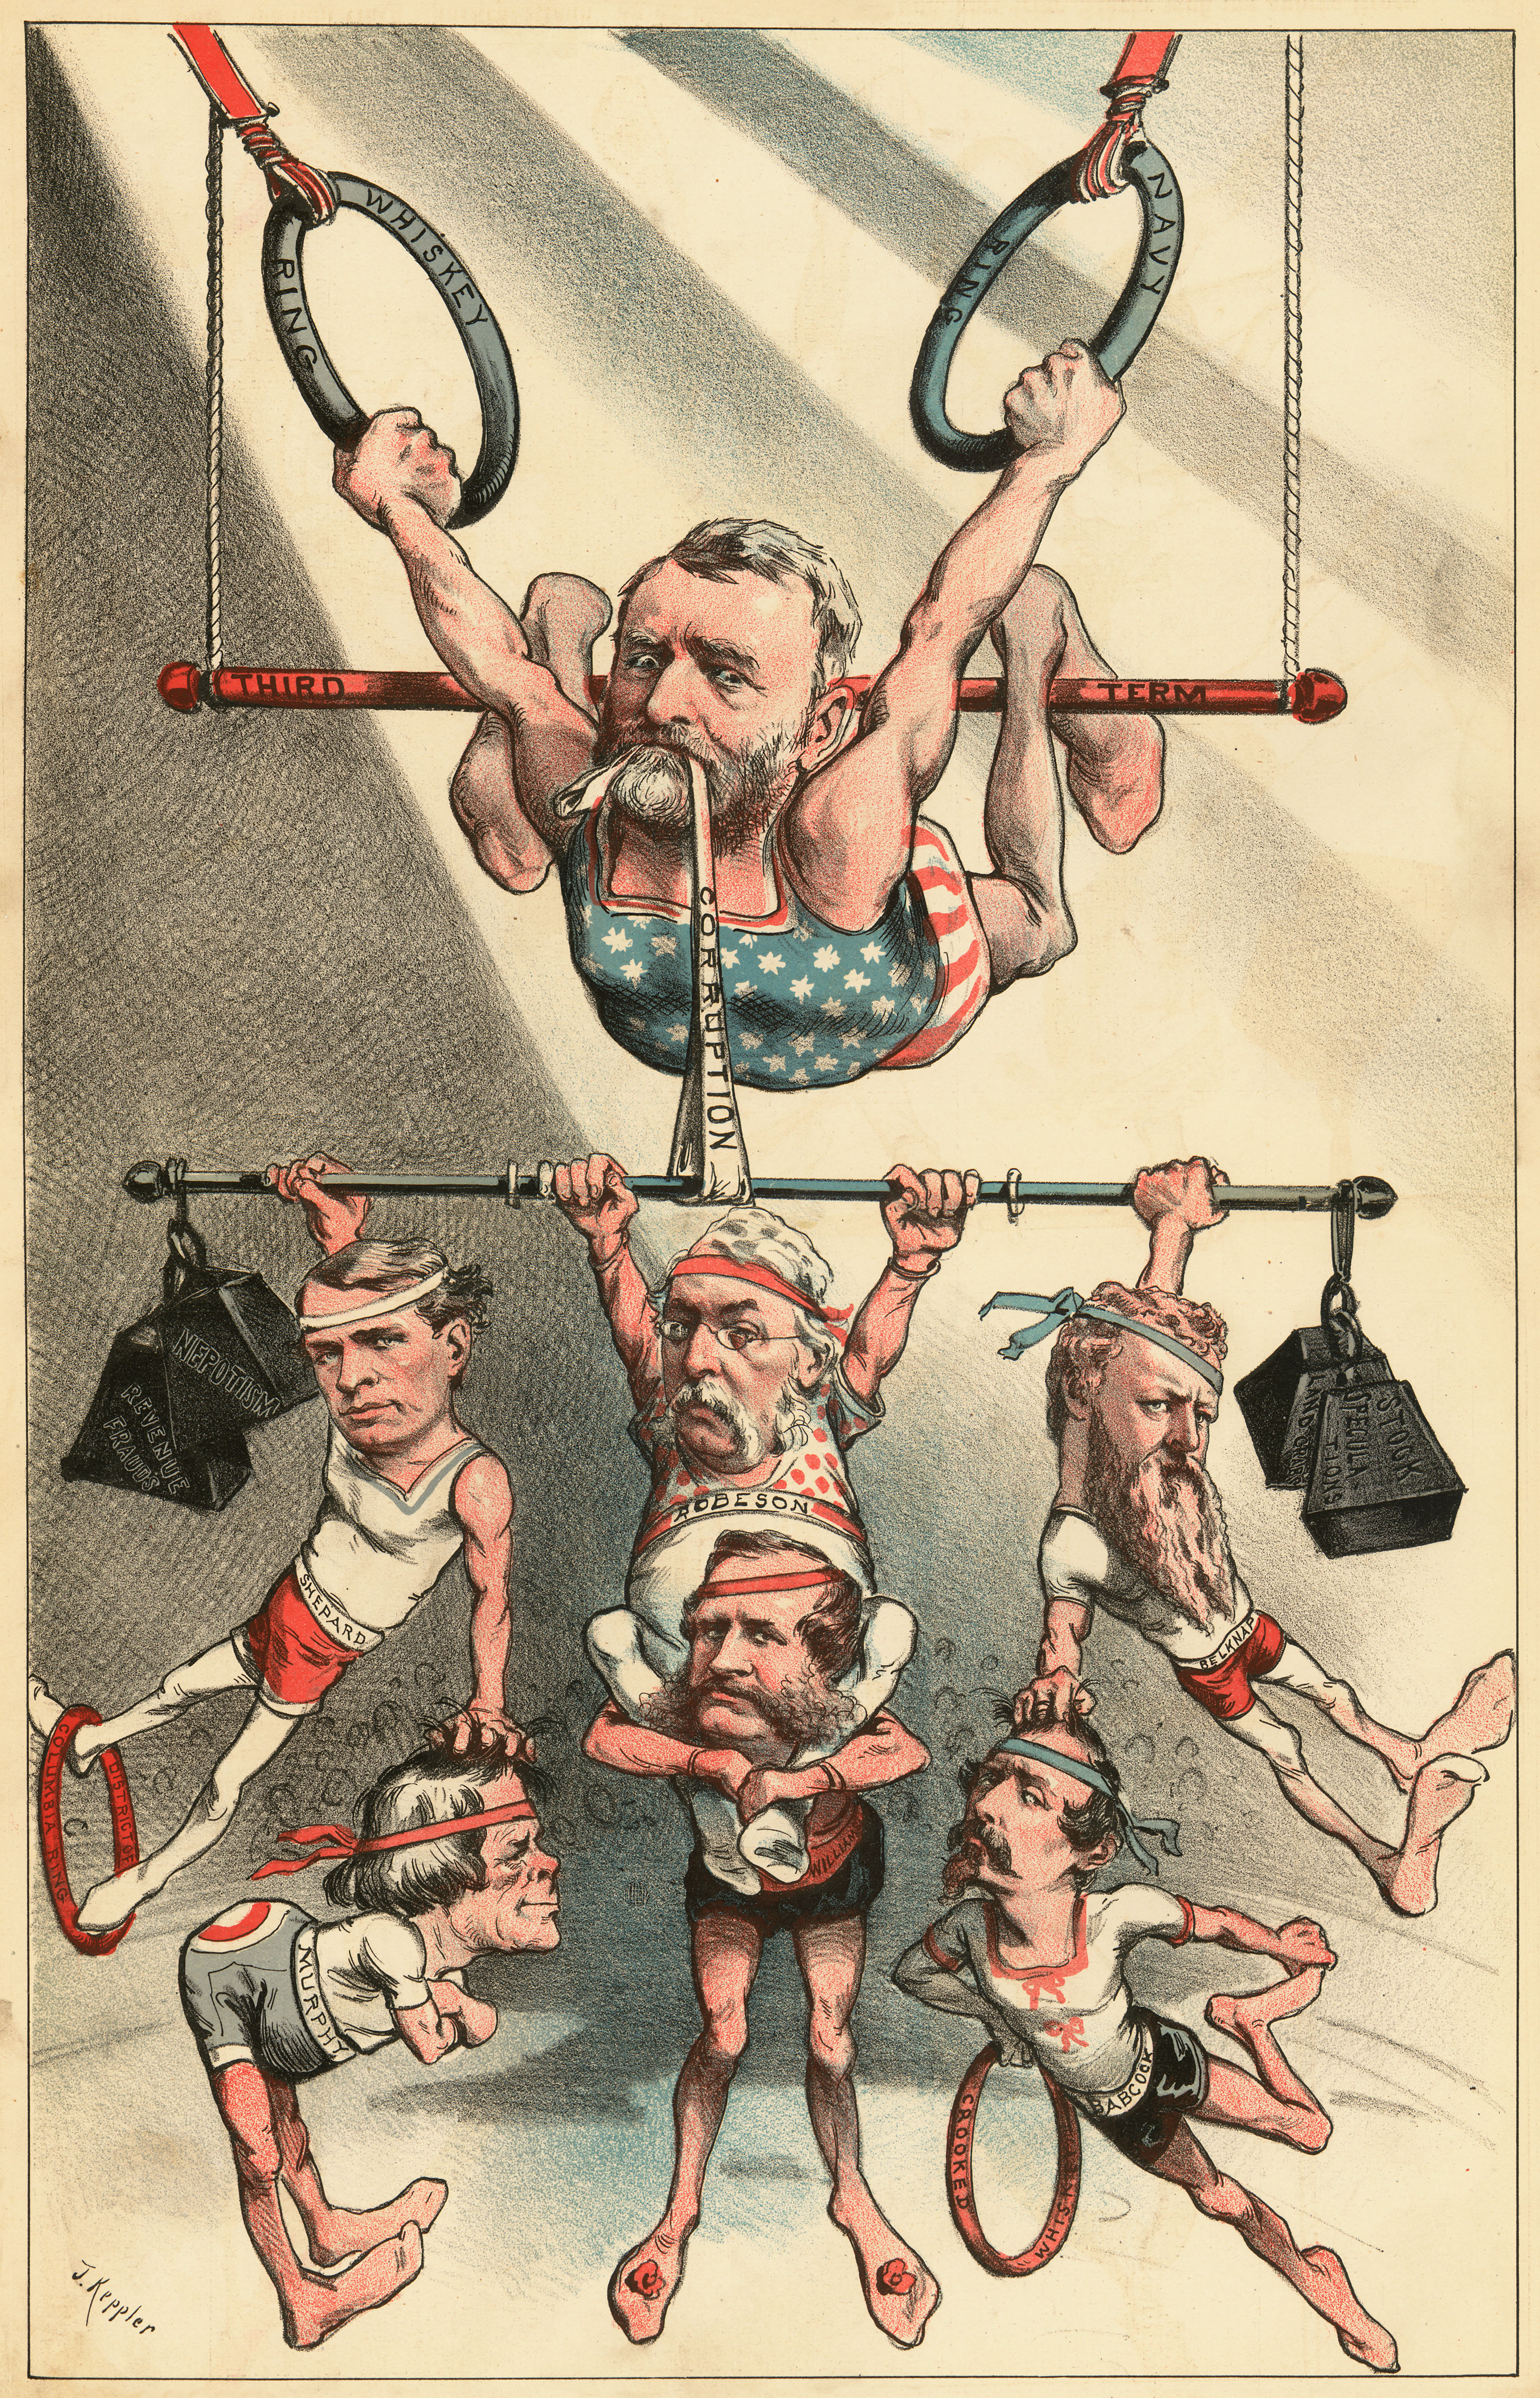 President Grant dressed as a trapeze performer, holds up corrupt members of his administration in this political cartoon from Puck magazine, 1880. (Getty Images)